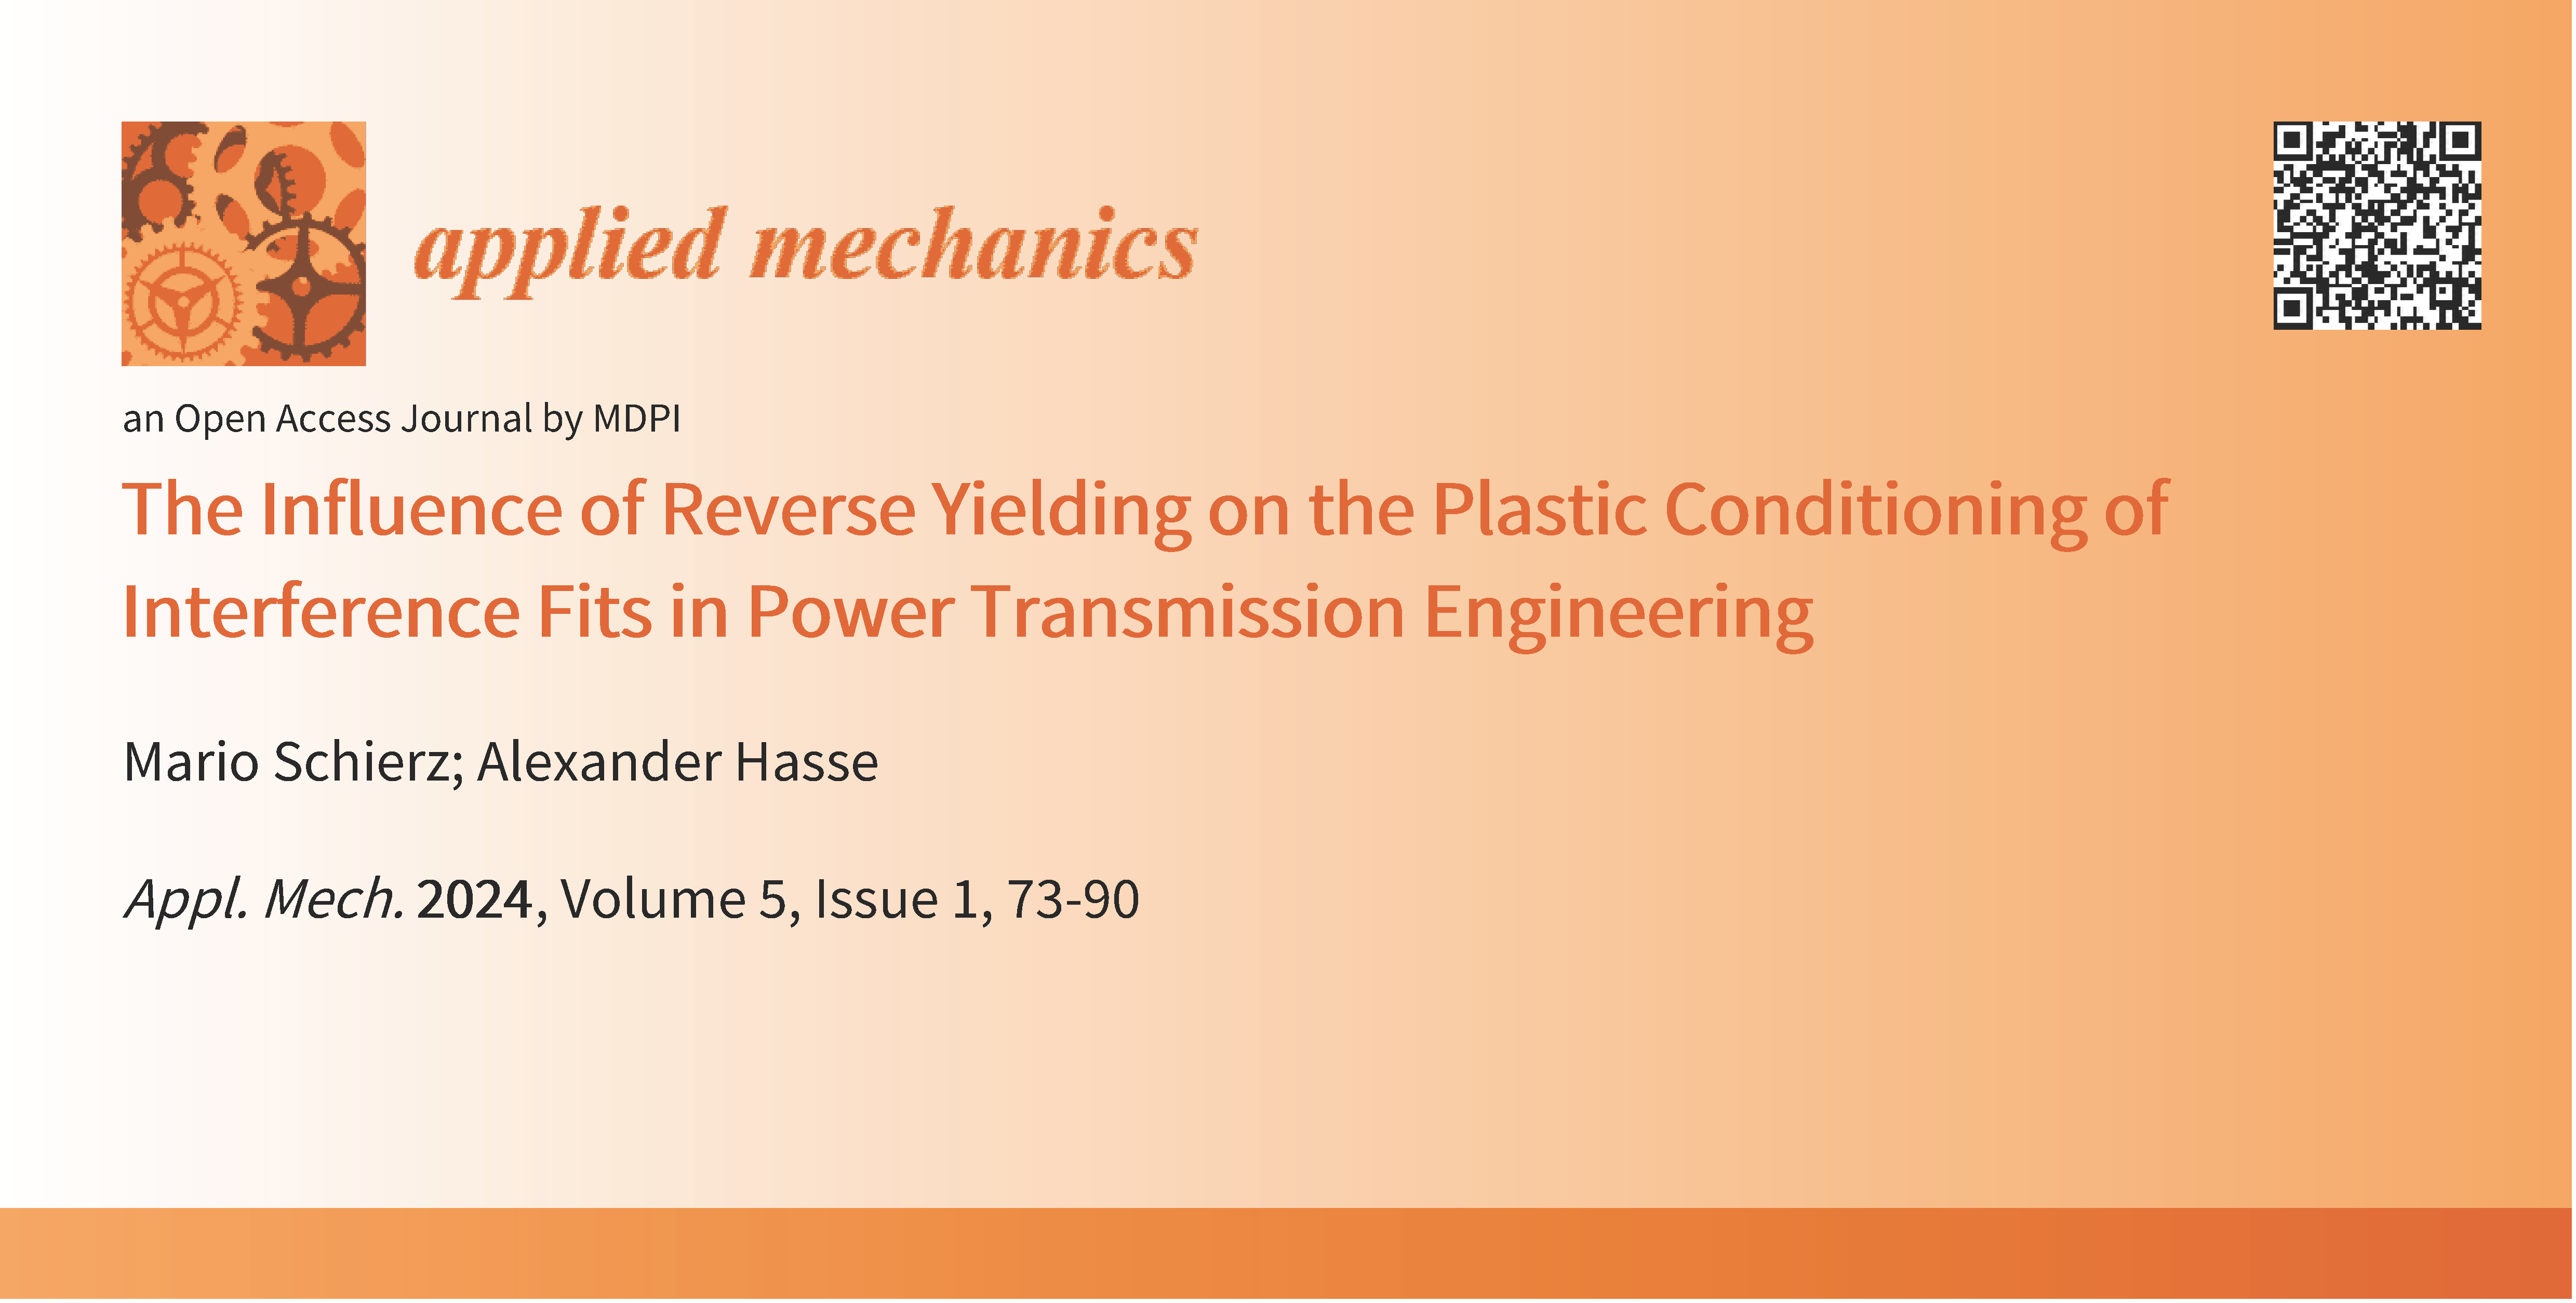 Paper on The Influence of Reverse Yielding on the Plastic Conditioning of Interference Fits in Power Transmission Engineering